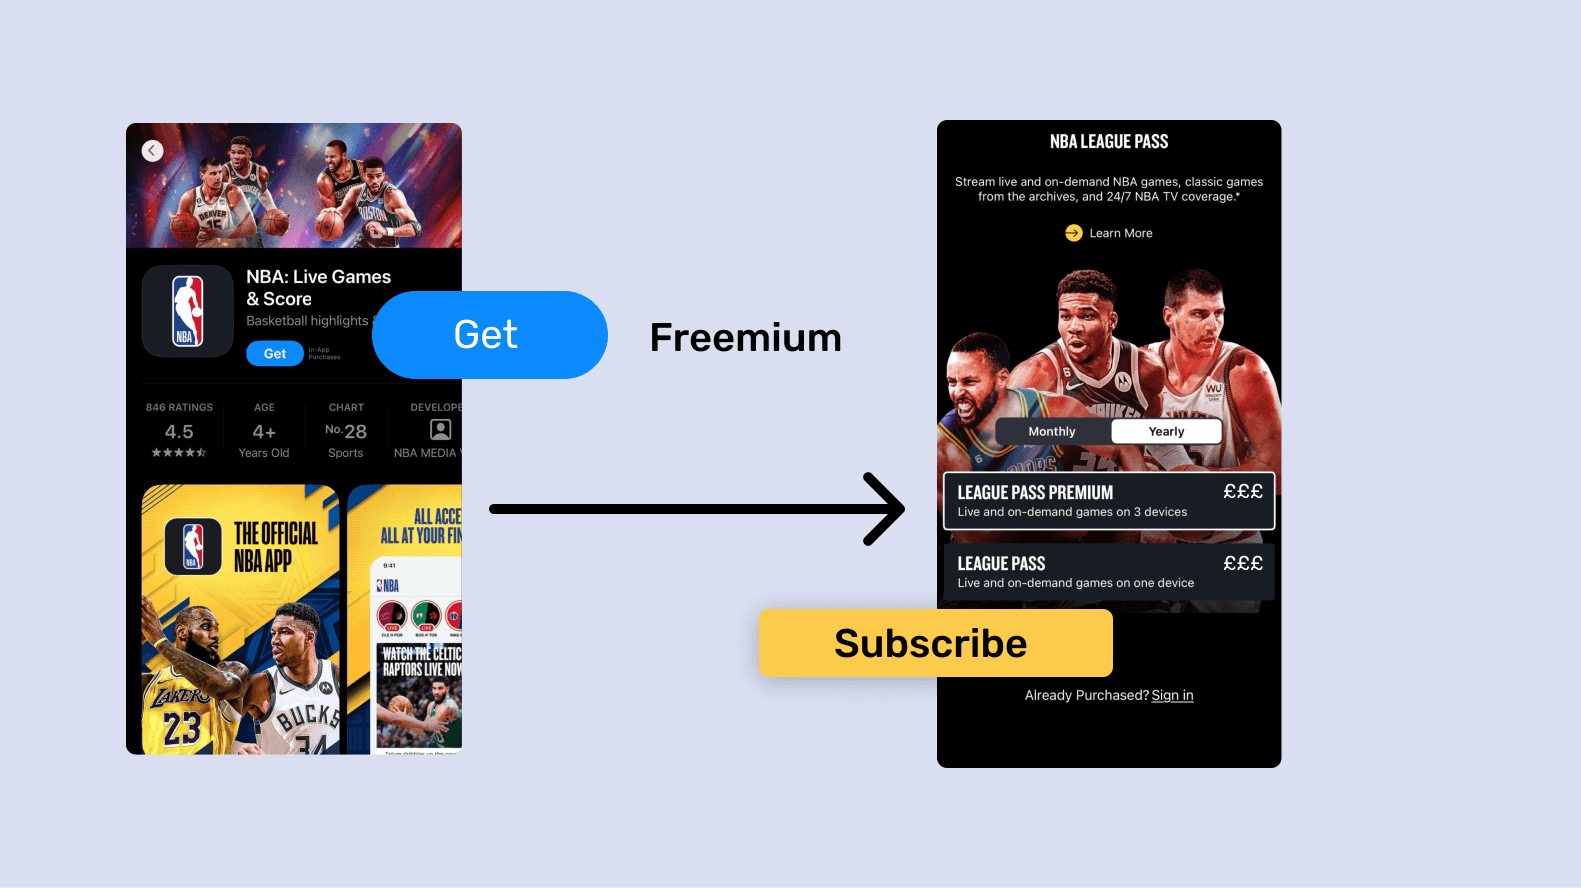 The NBA's app on Apple's App Store demonstrates a freemium monetization strategy. Users can download the app for free, accessing basic features. Yet, within the app, promotions for NBA league pass subscriptions entice users with premium content for a fee.